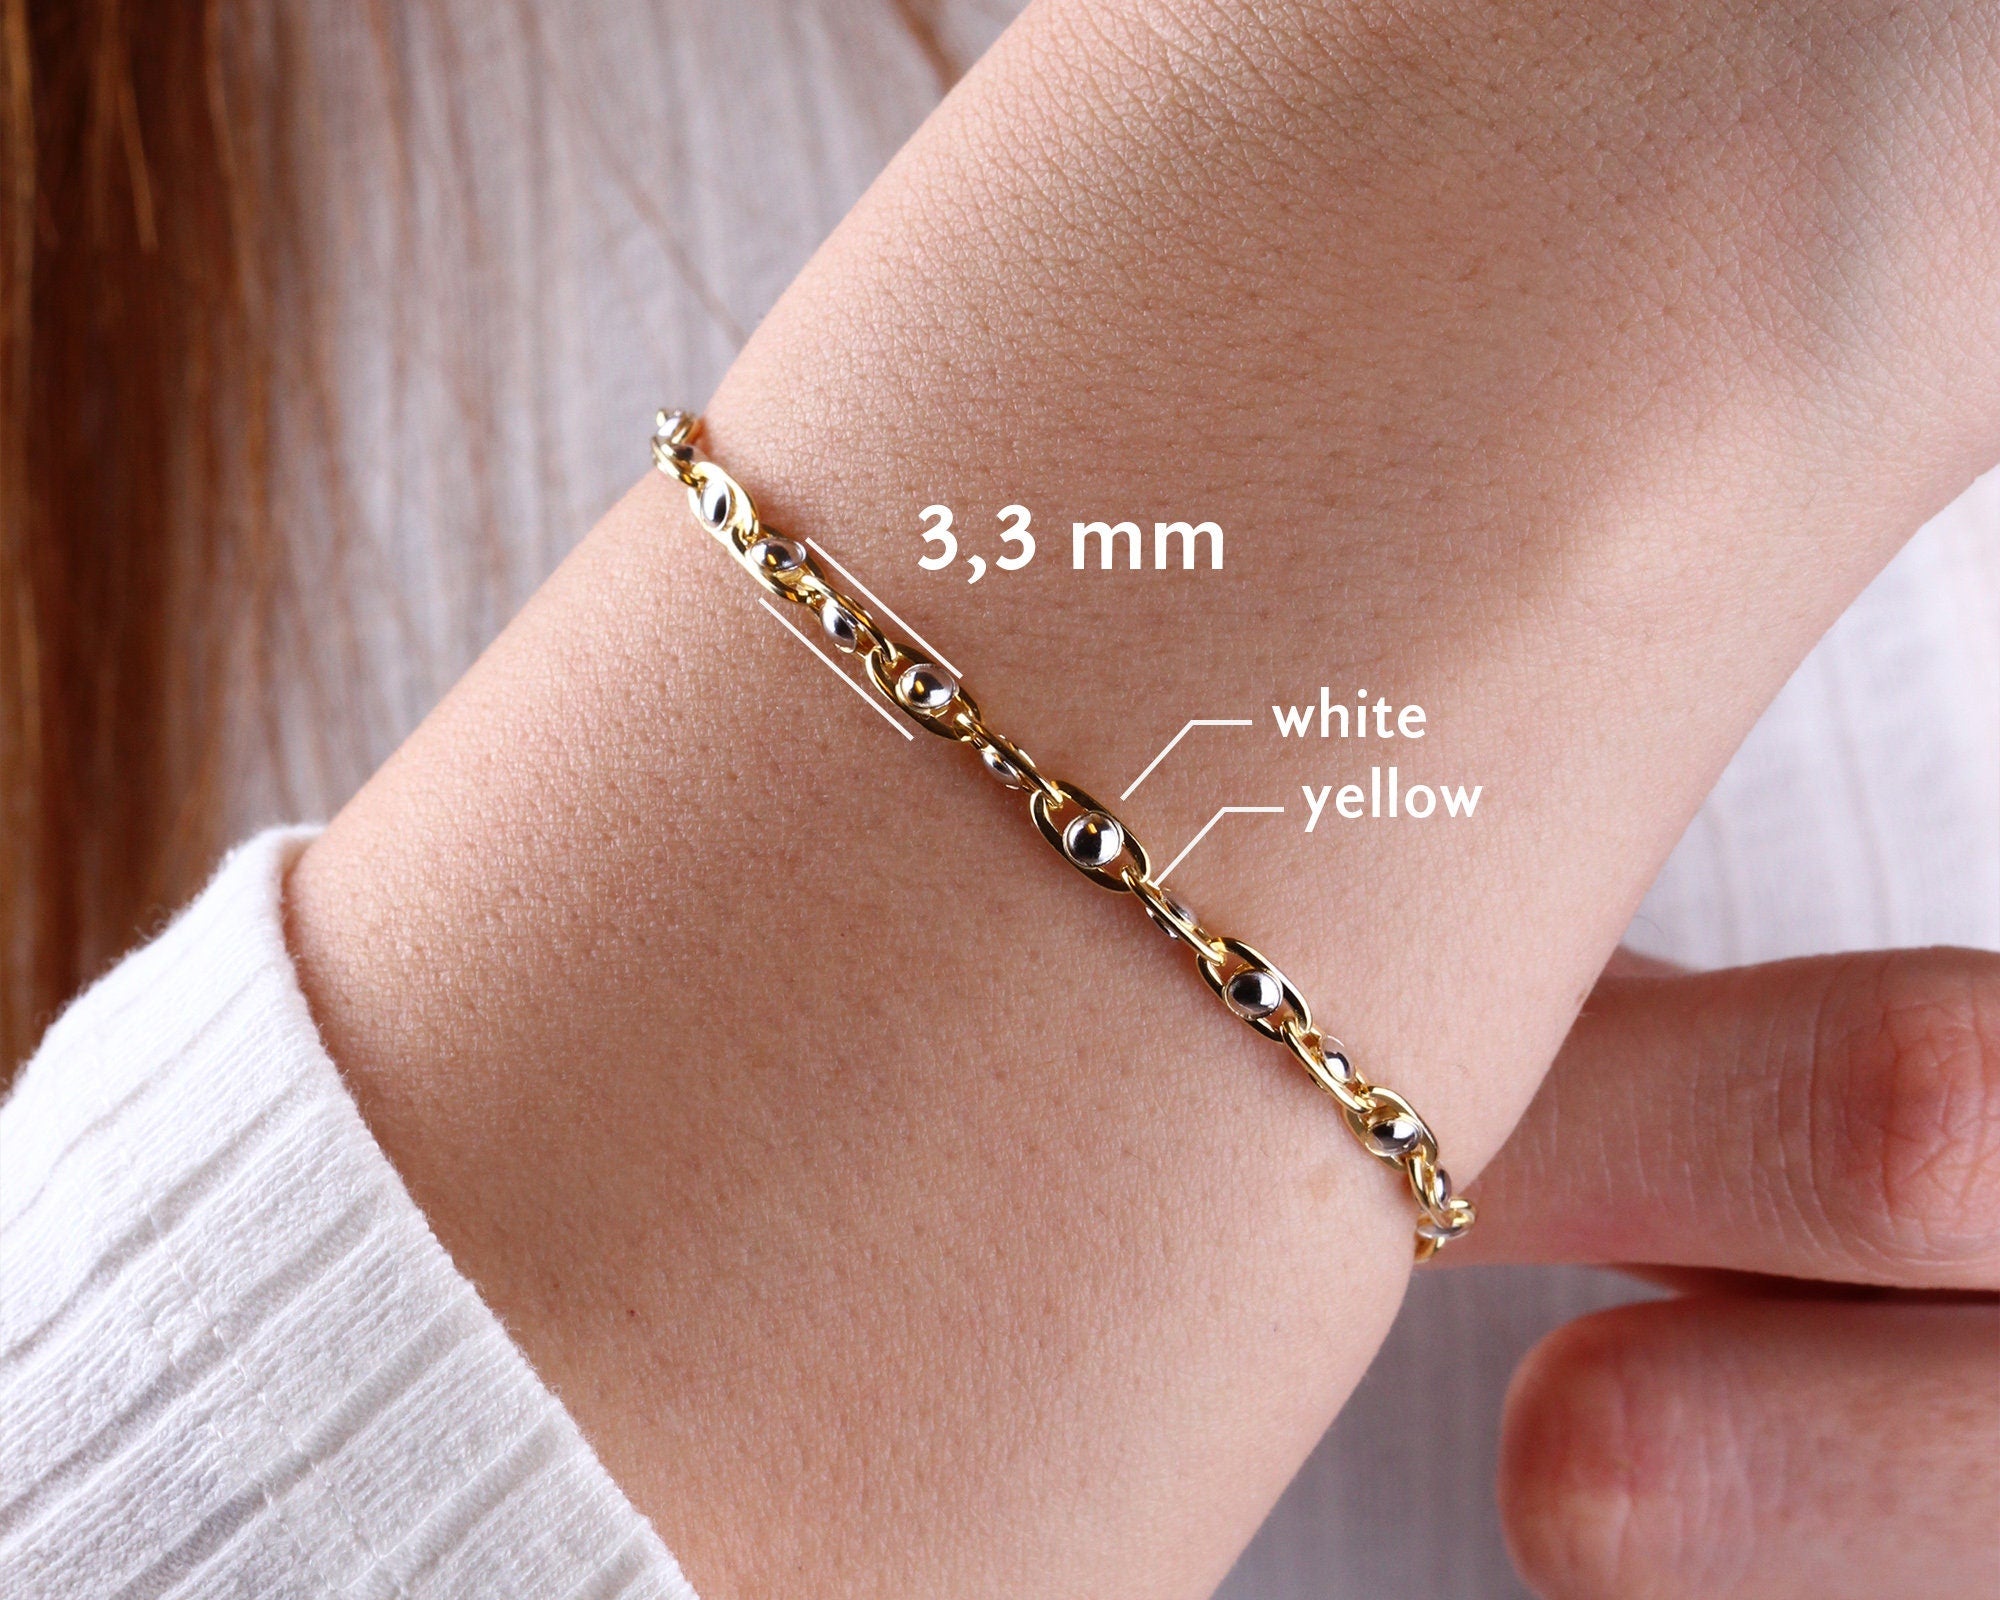 14K Gold Two Tone Beaded Chain Bracelet, Oval Chain Bead Bracelet, Rectangle Long Paperclip Chain Anklet, Chunky Chain Link, Gift For Her